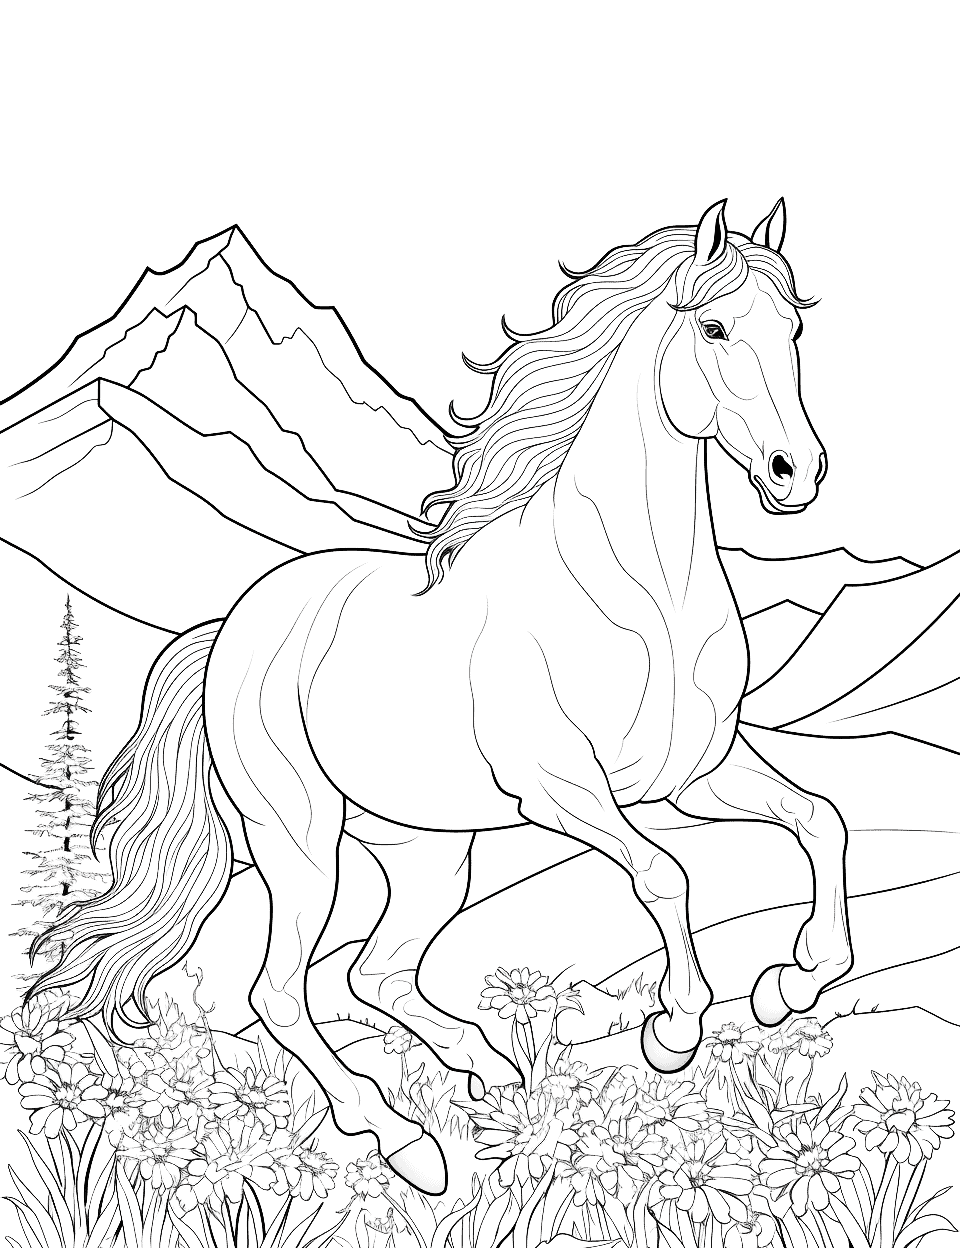 Horse's Mountain Gallop Adult Coloring Page - A horse galloping against a backdrop of distant mountains.